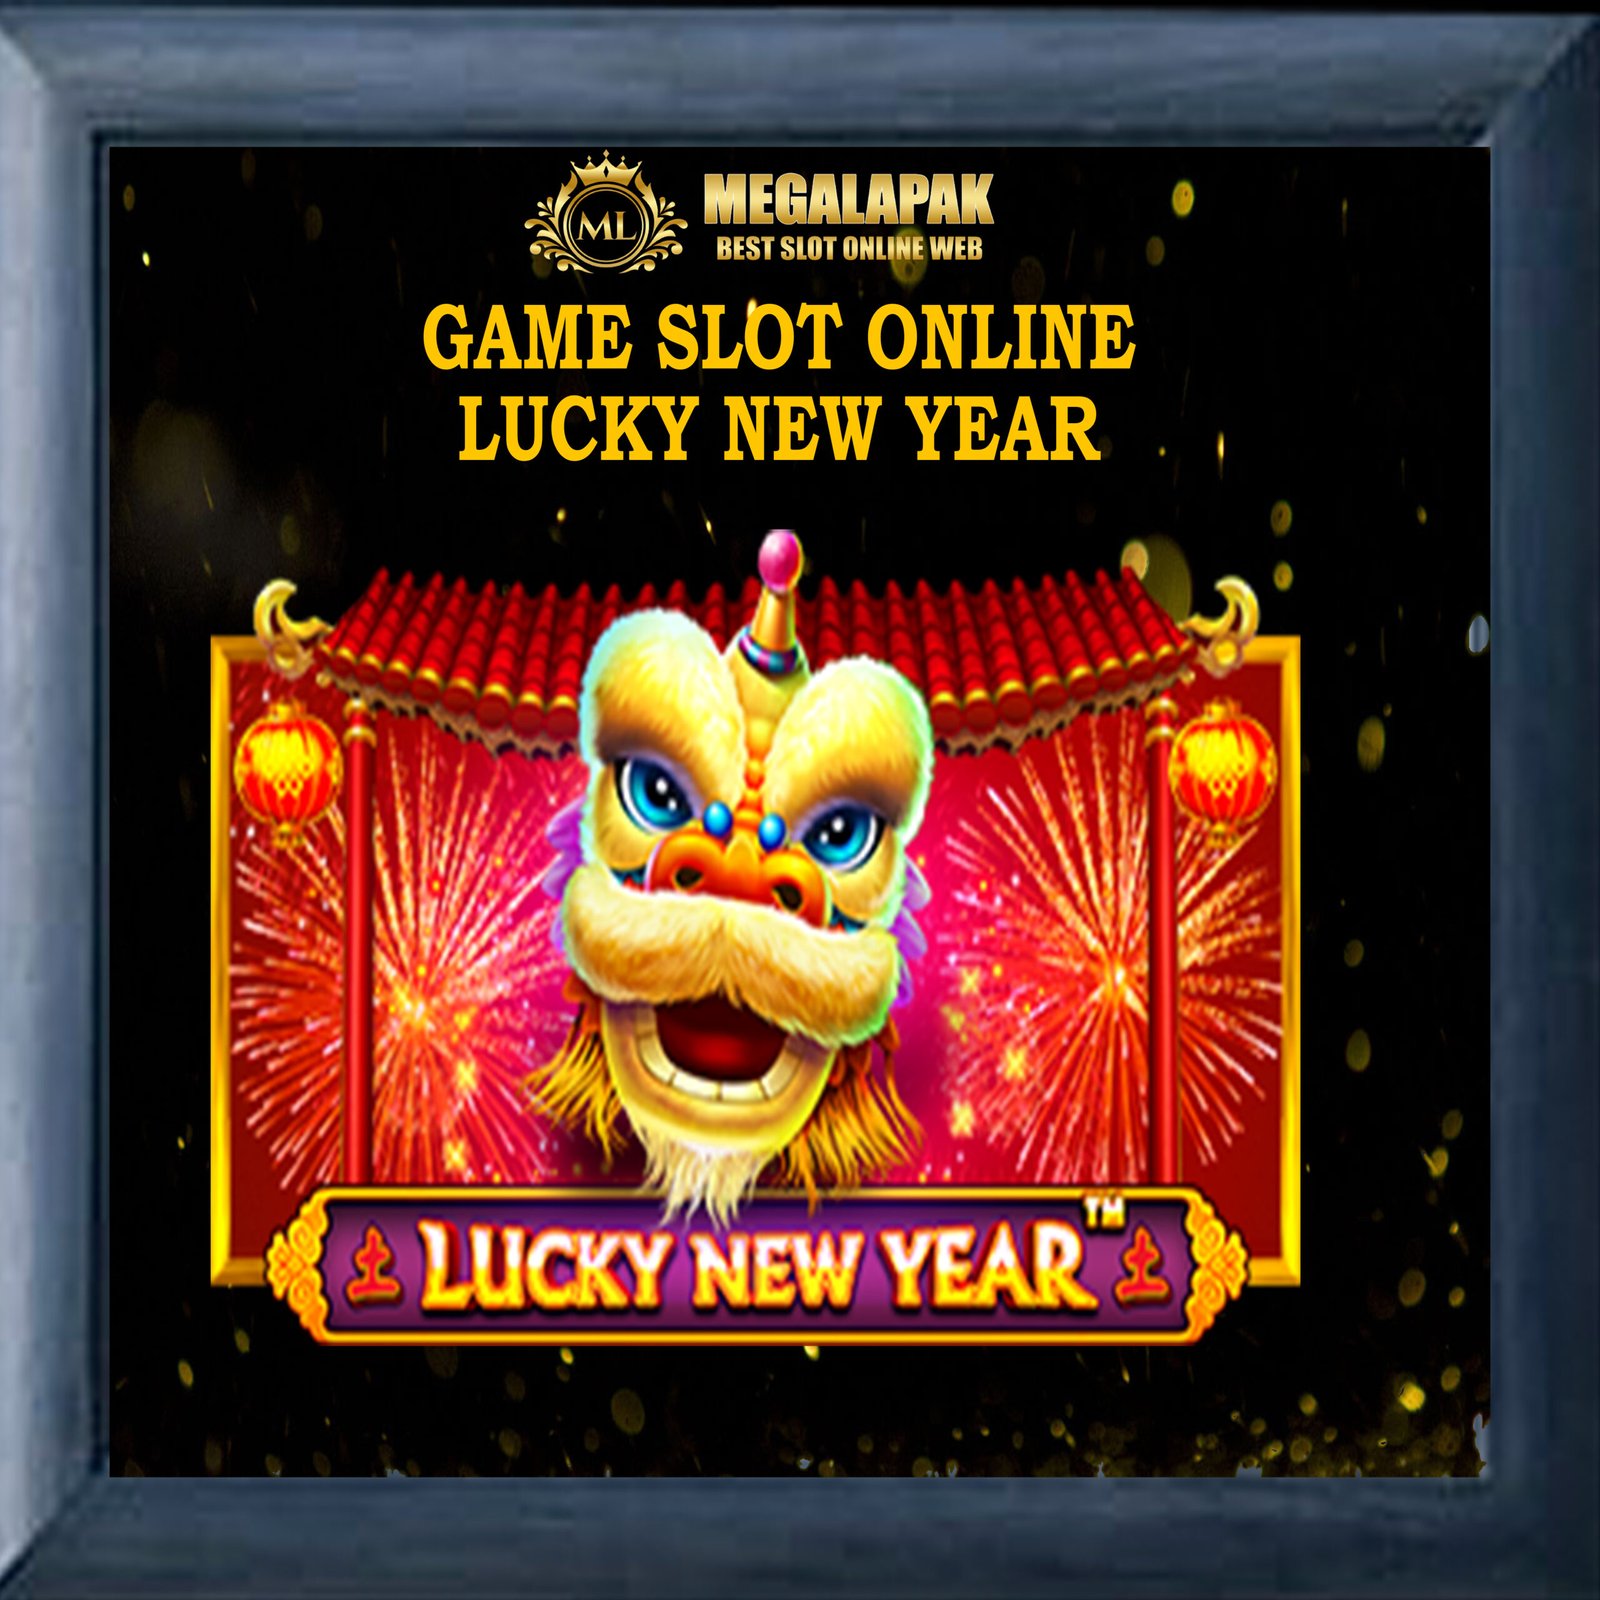 Slot Online Lucky New Year Megalapak